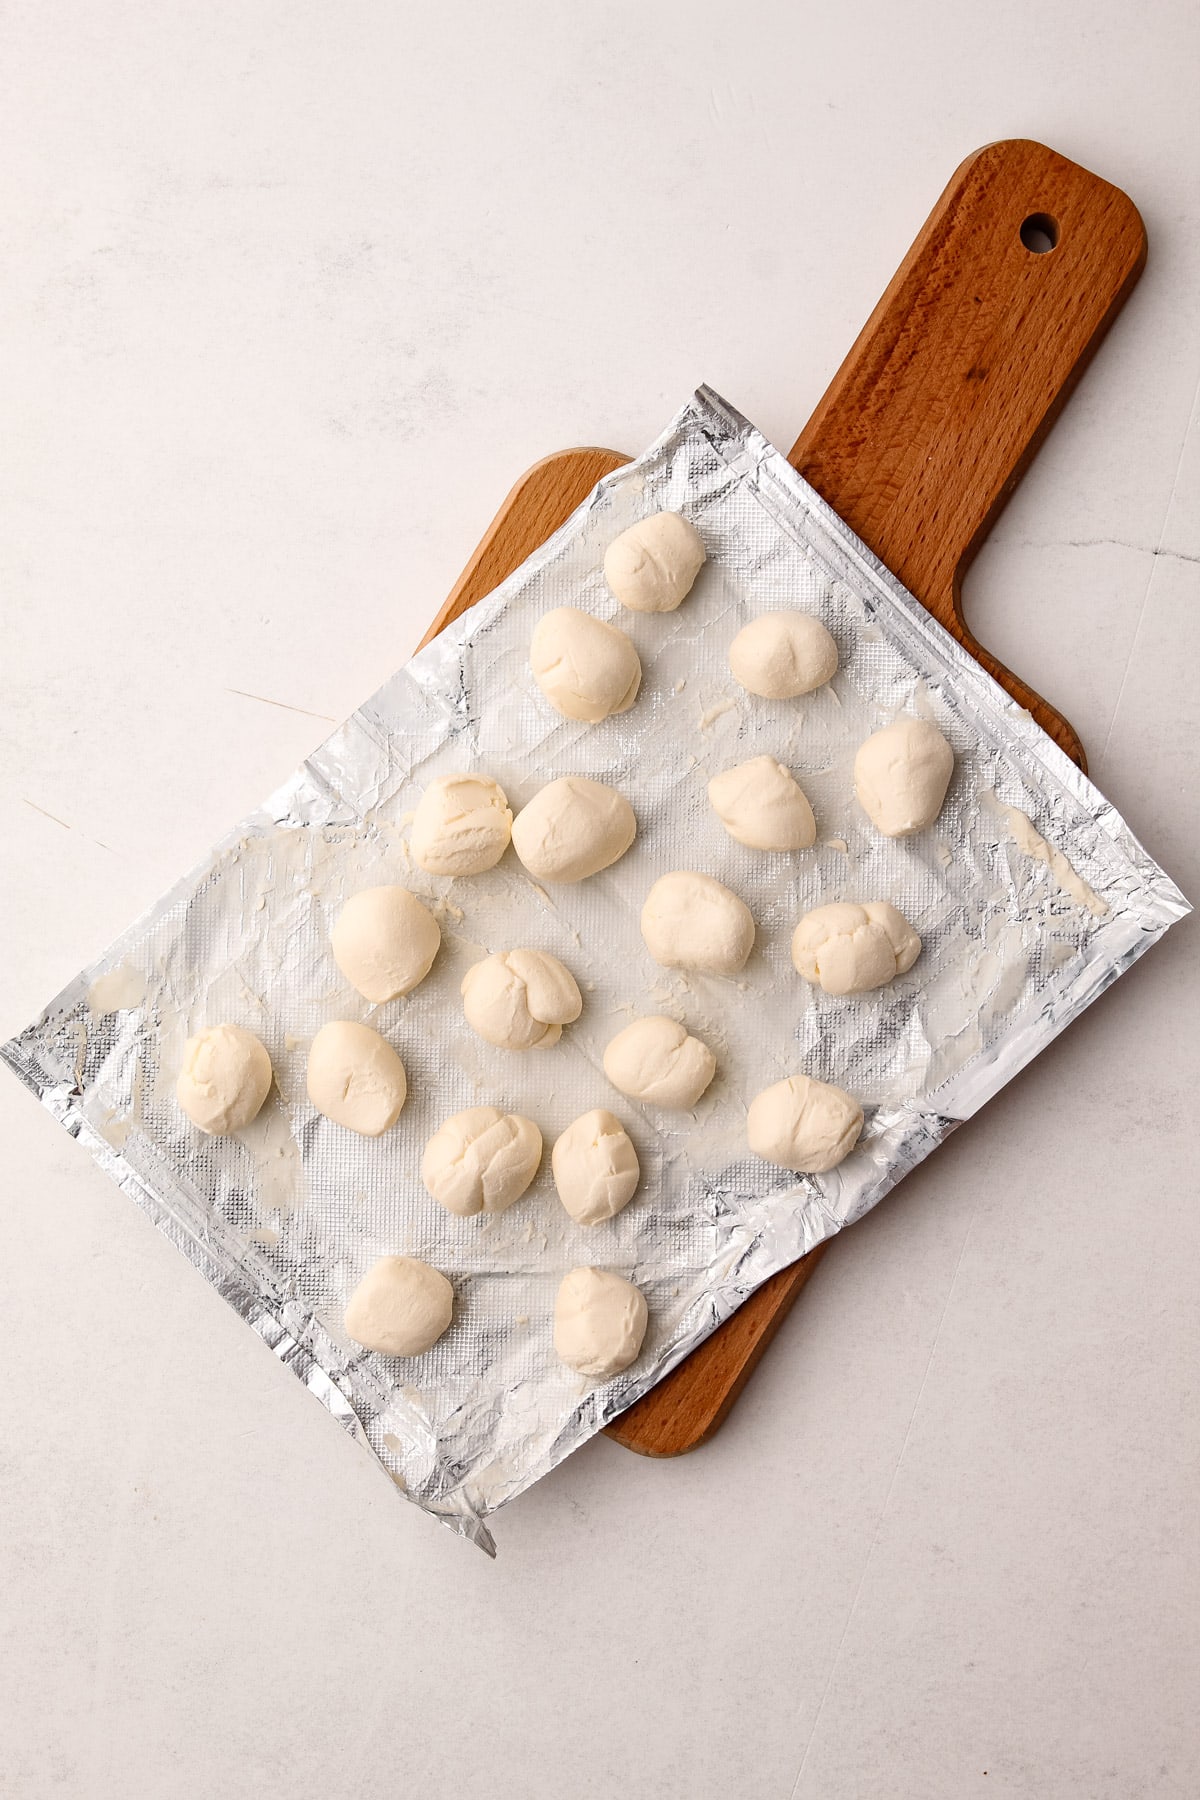 Rounded balls of cream cheese on foil on a cutting board for puff pastry pepper jelly bites.